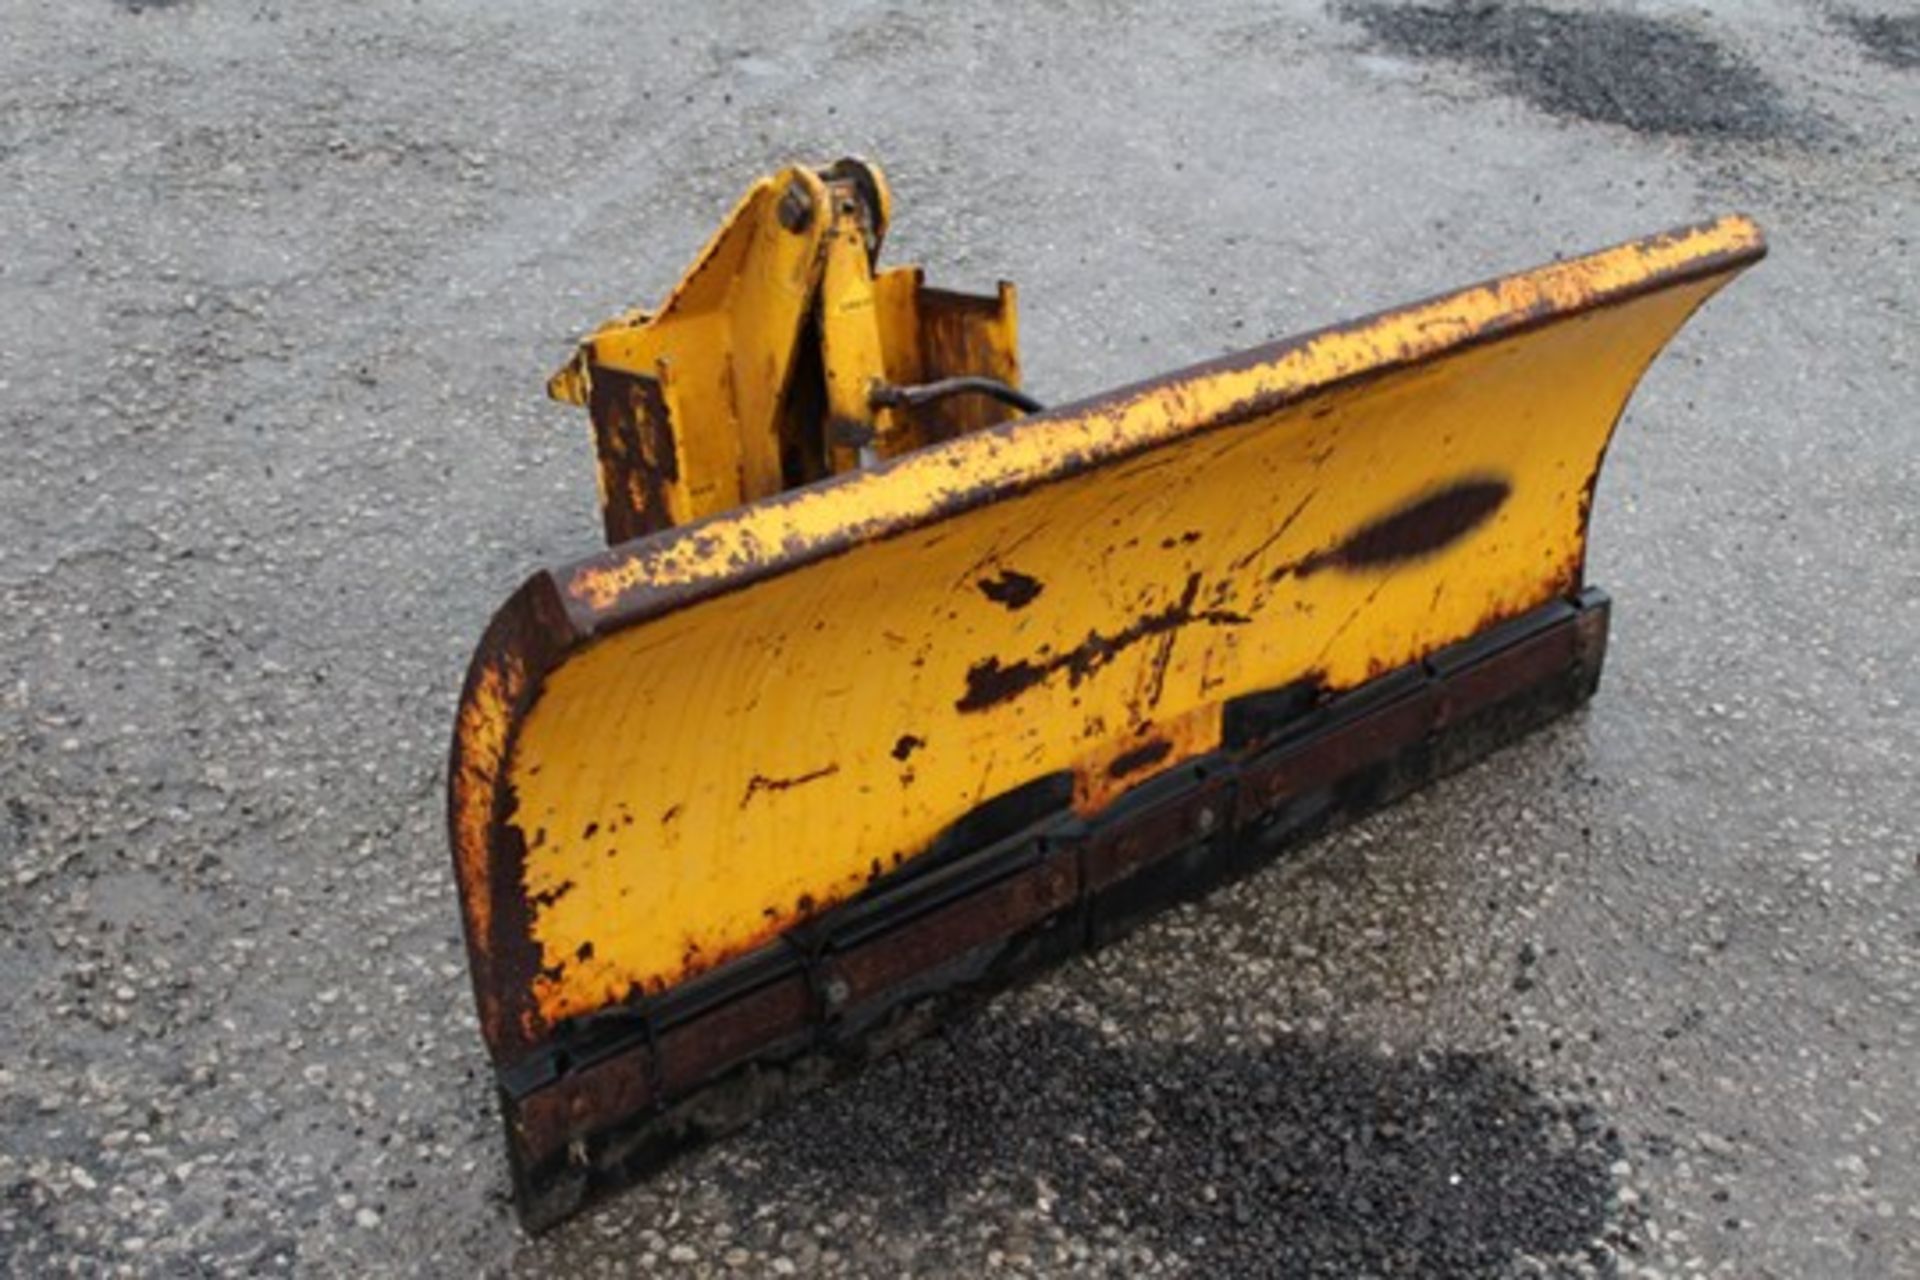 Snow Plow Attachment For Compact Tractor - Image 5 of 5